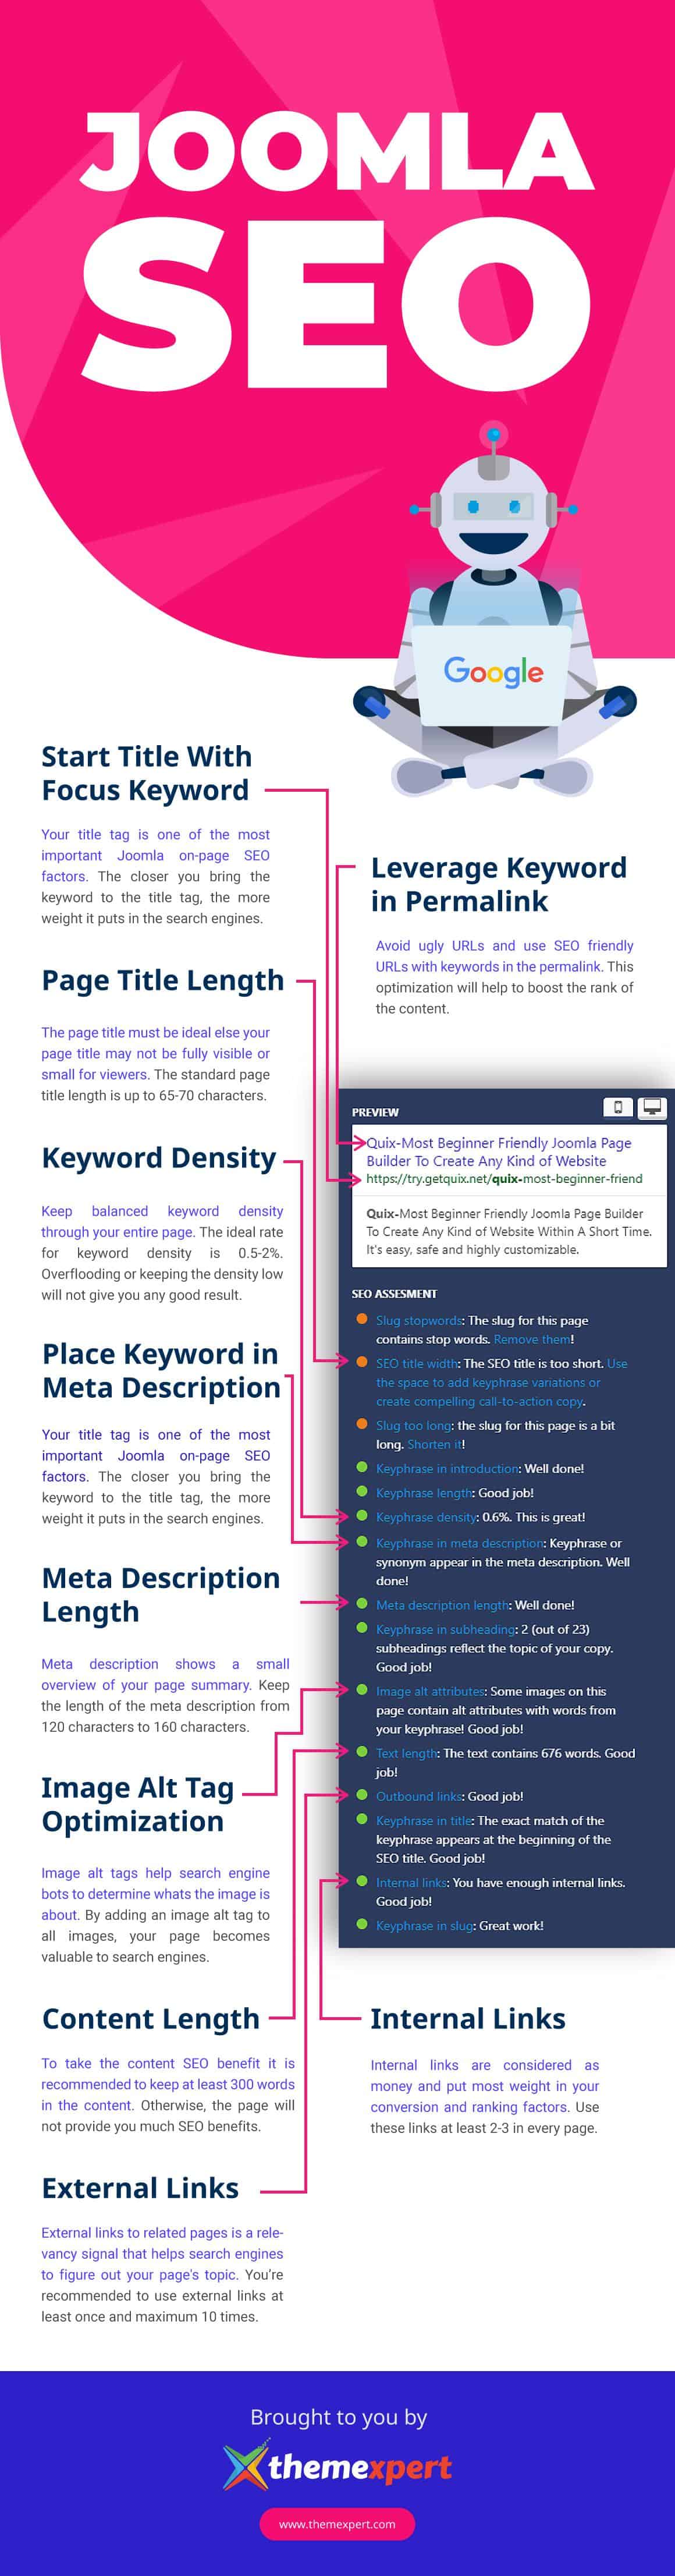 infographic creator copy and paste